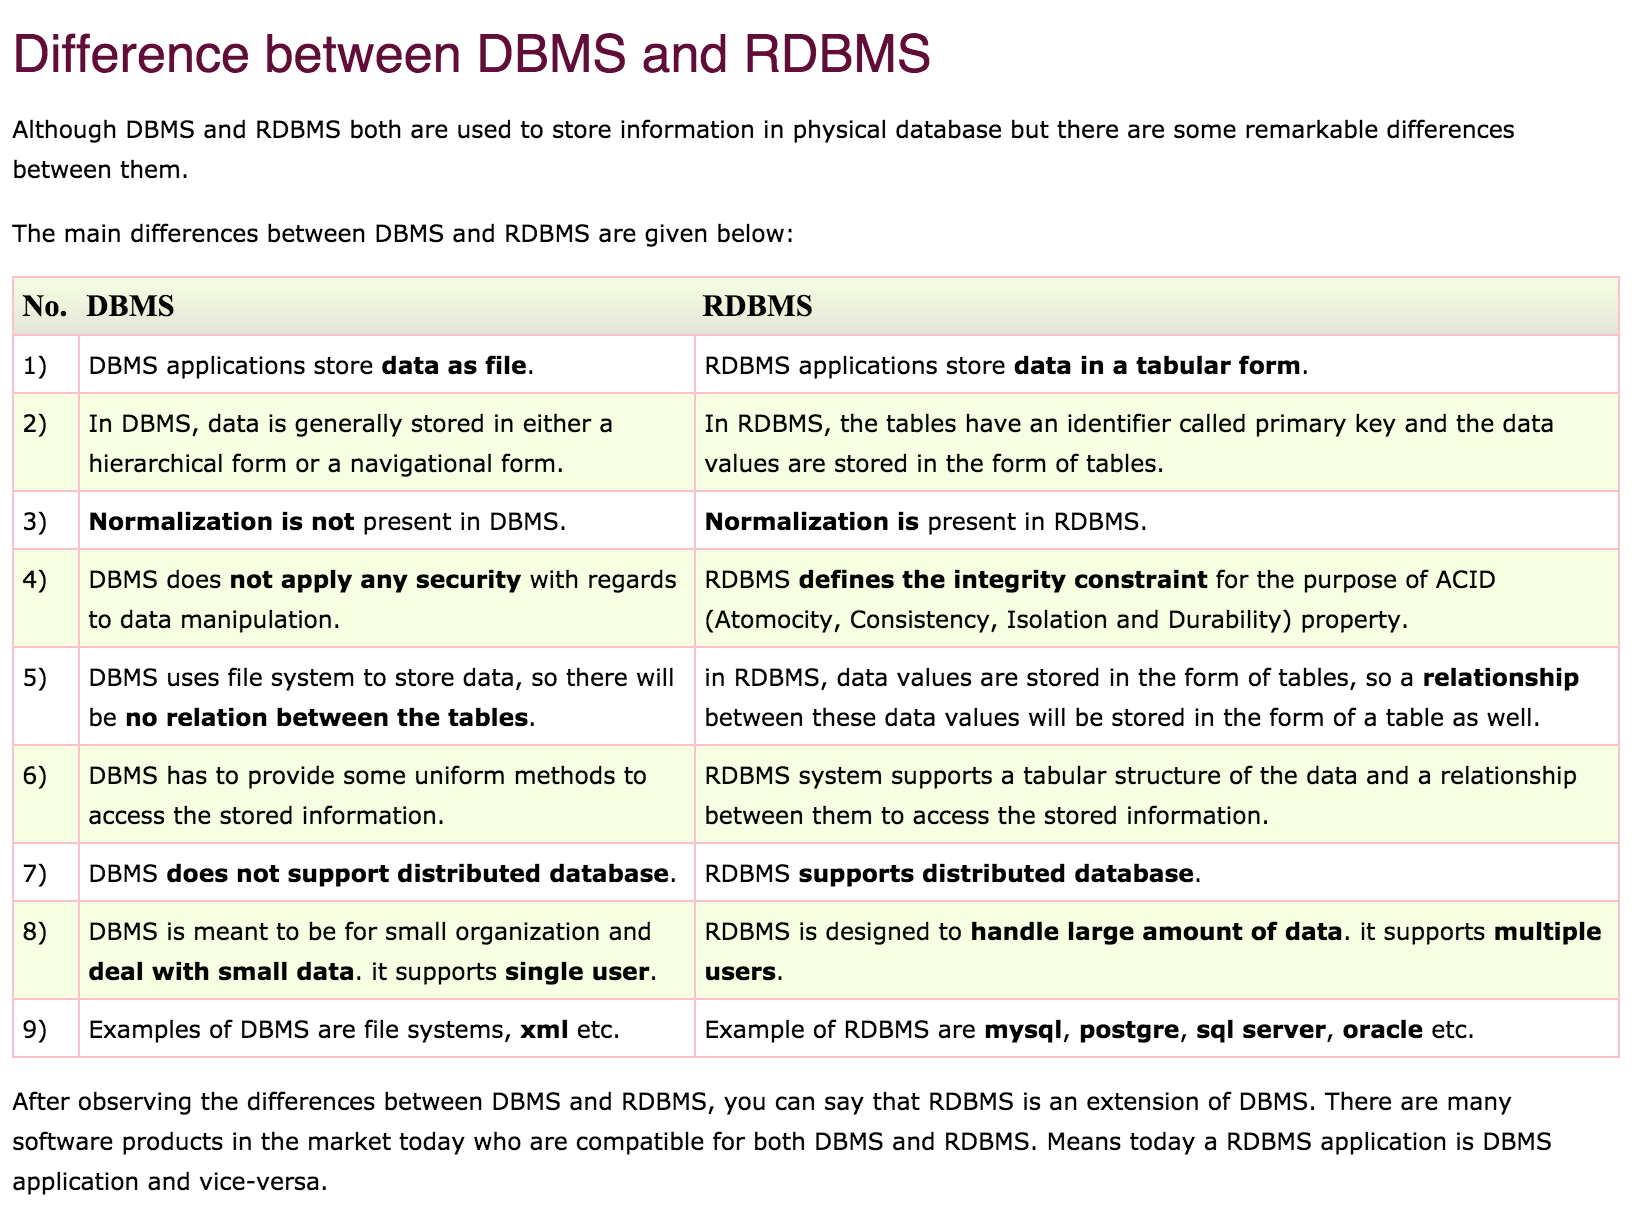 table of differences between DBMS and RDBMS